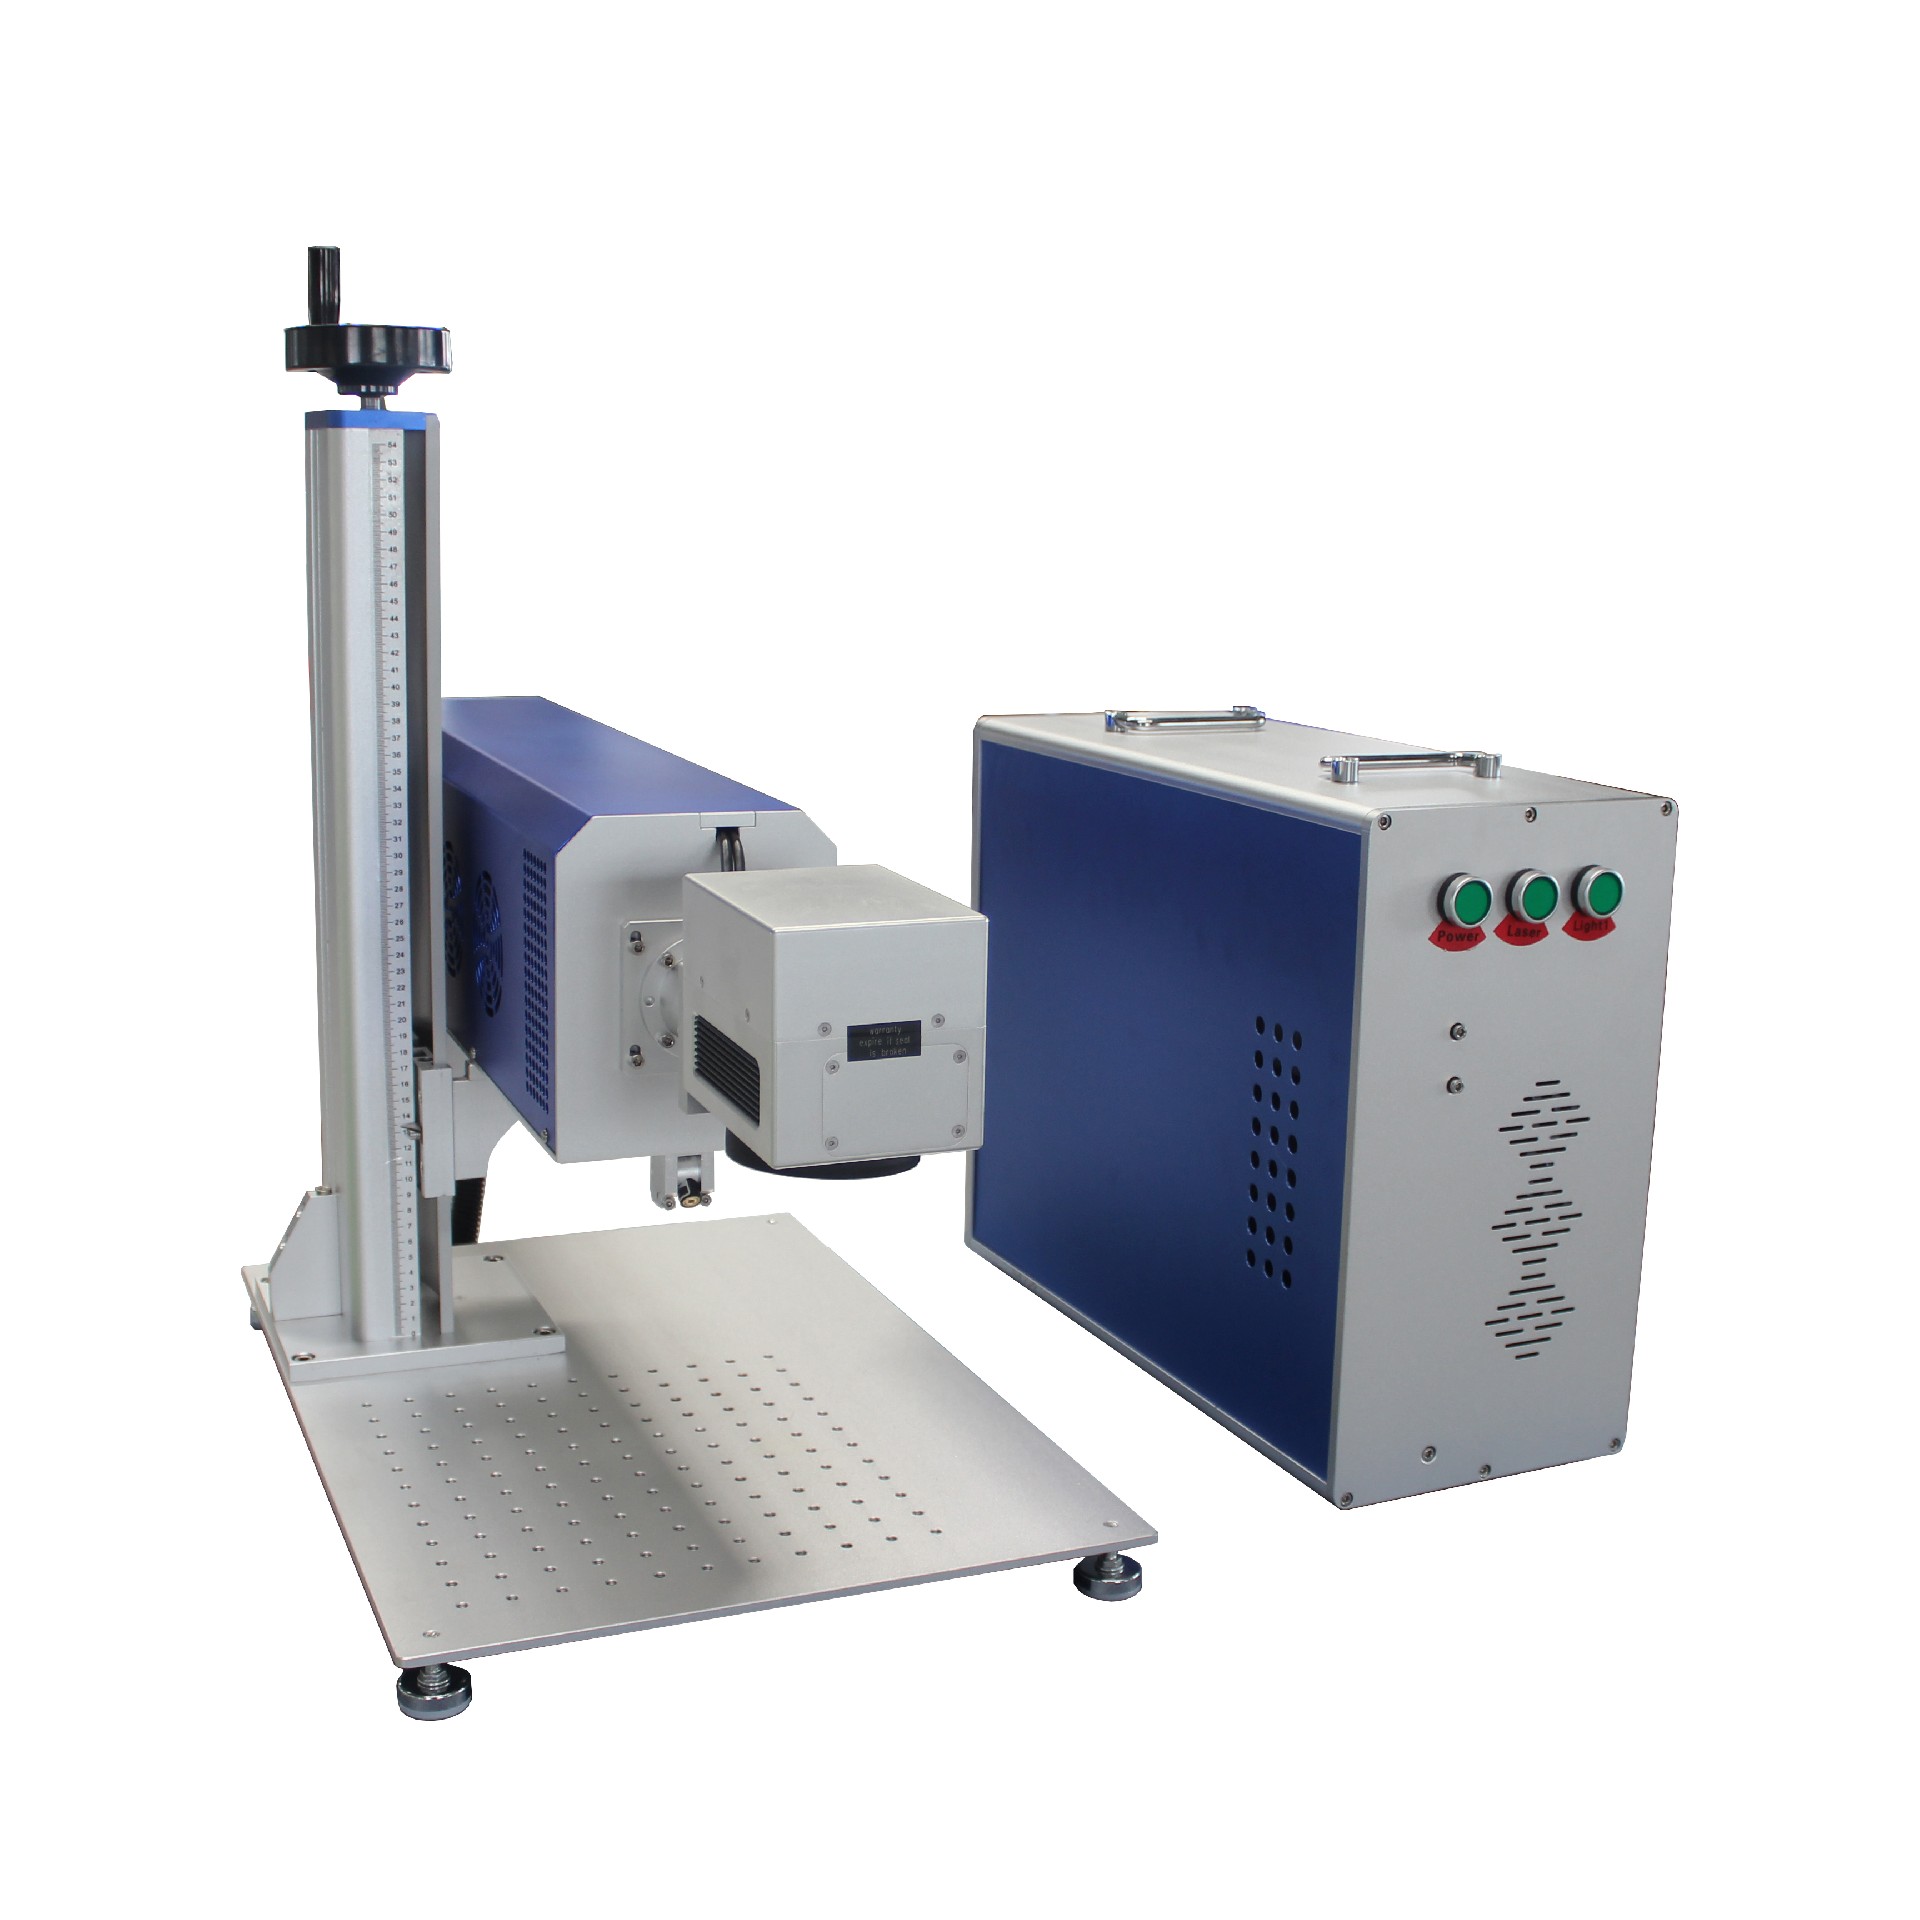 CO2 laser can mark on a wide range of artificial and natural surfaces.